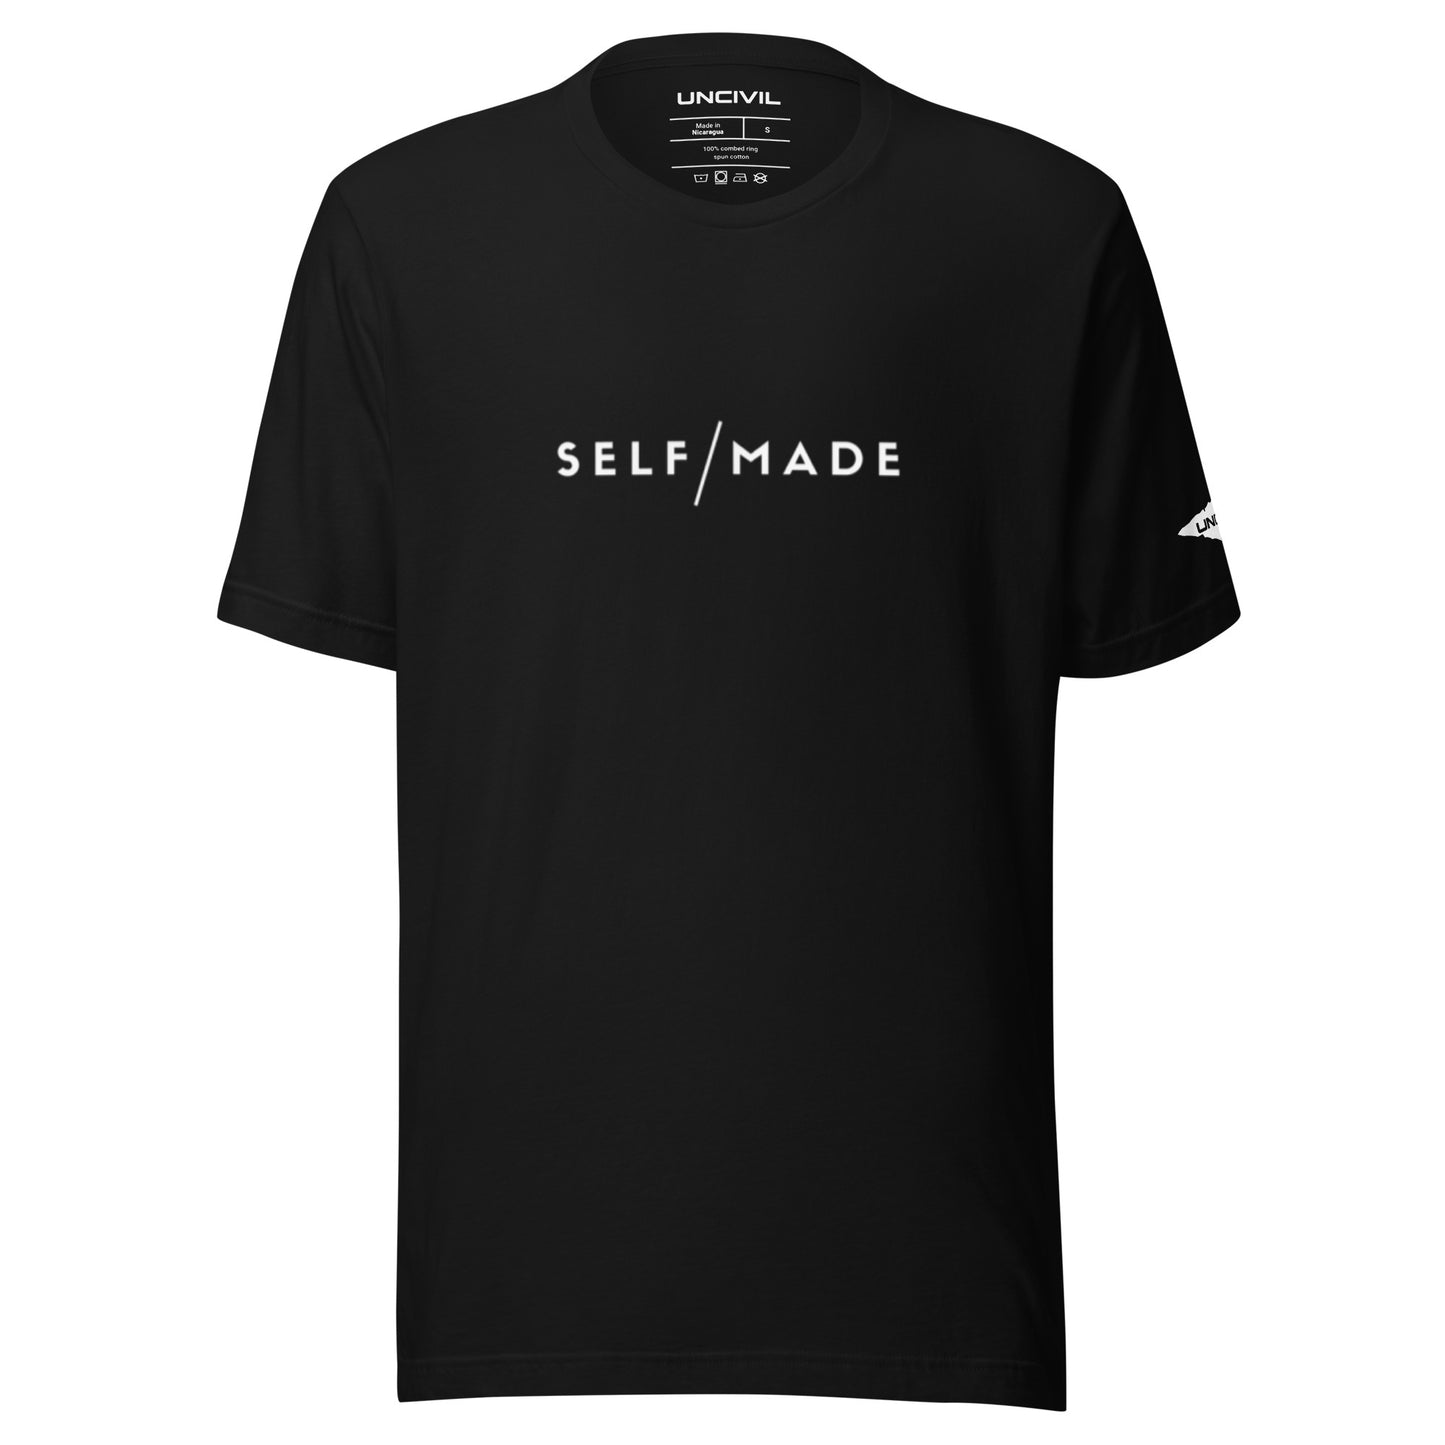 Our Self/Made UNCIVIL lifestyle shirt embodies empowerment and resilience. Black unisex shirt.